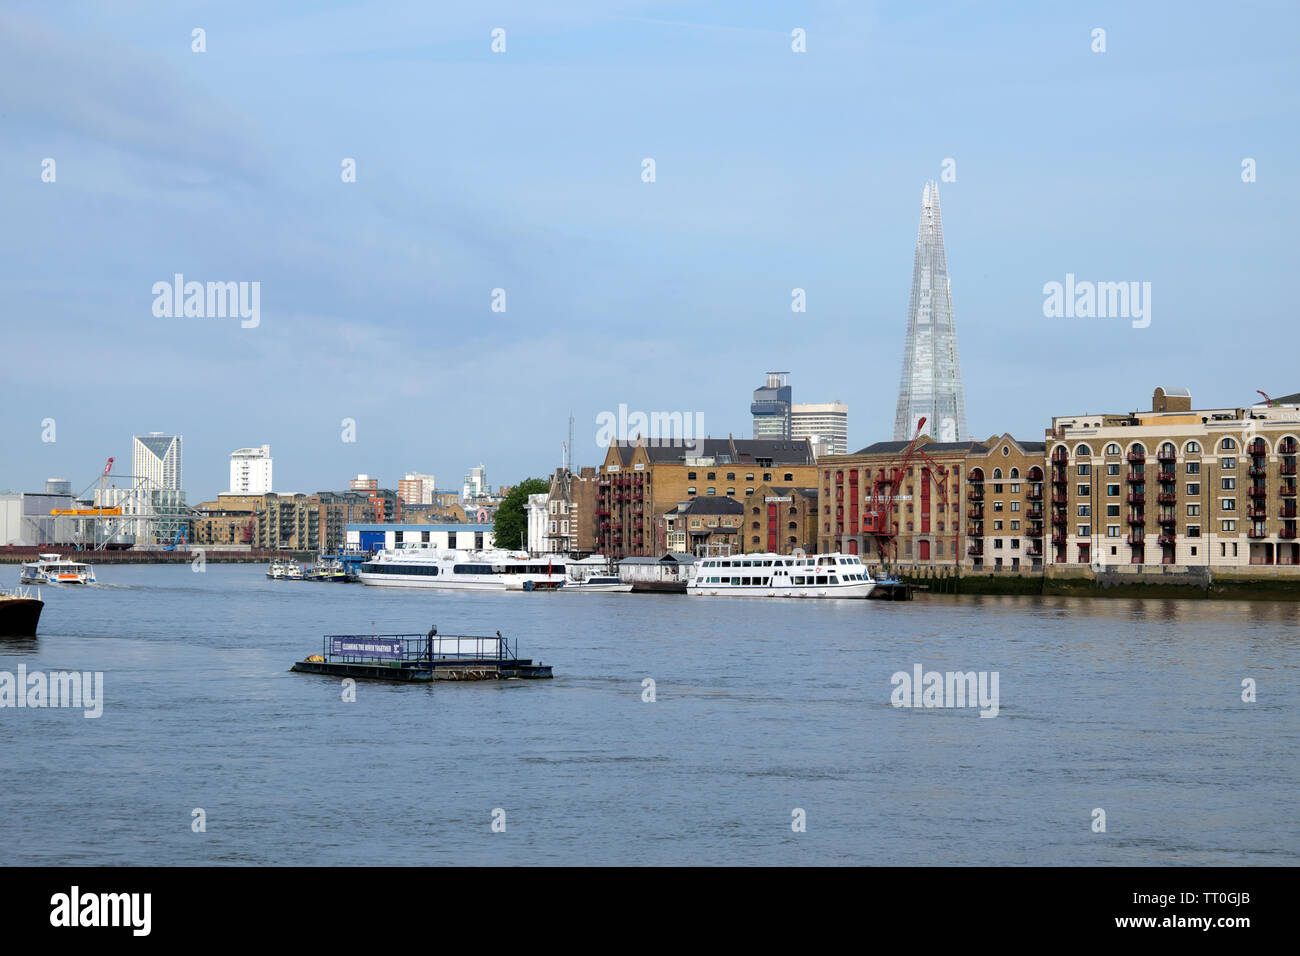 View of Shard skyscraper, Wapping city apartments, boats and barge on the River Thames view from Rotherhithe South London England UK KATHY DEWITT Stock Photo